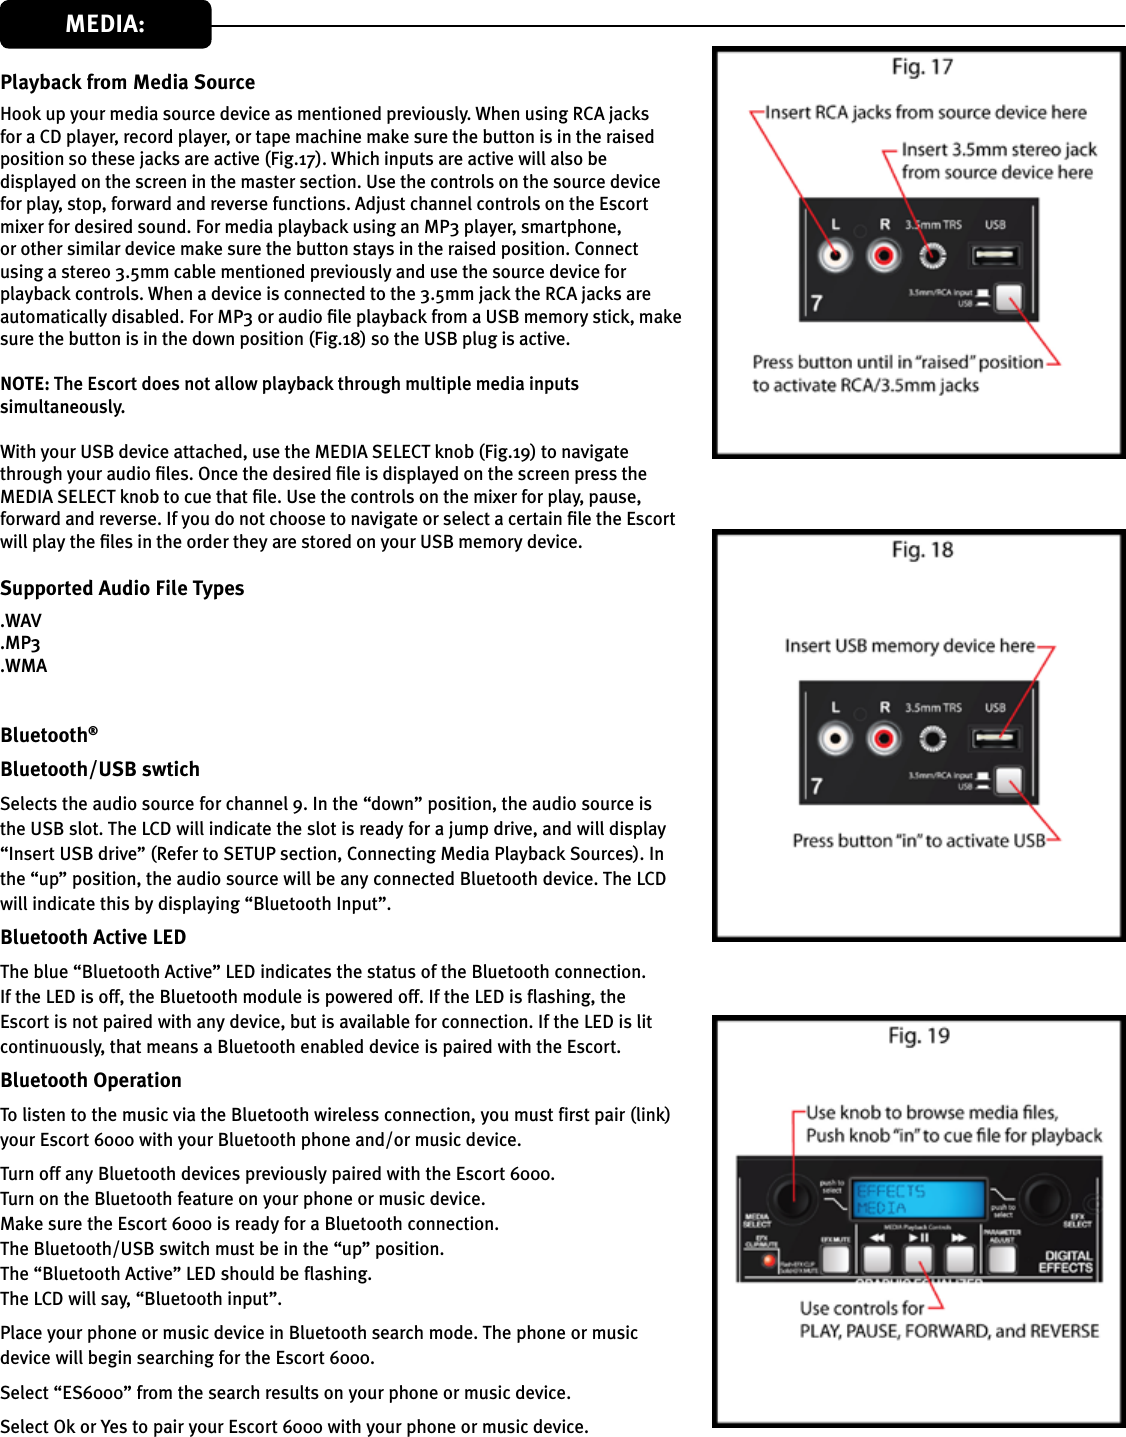 Playback from Media SourceHook up your media source device as mentioned previously. When using RCA jacks for a CD player, record player, or tape machine make sure the button is in the raised position so these jacks are active (Fig.17). Which inputs are active will also be displayed on the screen in the master section. Use the controls on the source device for play, stop, forward and reverse functions. Adjust channel controls on the Escort mixer for desired sound. For media playback using an MP3 player, smartphone, or other similar device make sure the button stays in the raised position. Connect using a stereo 3.5mm cable mentioned previously and use the source device for playback controls. When a device is connected to the 3.5mm jack the RCA jacks are automatically disabled. For MP3 or audio le playback from a USB memory stick, make sure the button is in the down position (Fig.18) so the USB plug is active.   The Escort does not allow playback through multiple media inputs simultaneously. With your USB device attached, use the MEDIA SELECT knob (Fig.19) to navigate through your audio les. Once the desired le is displayed on the screen press the MEDIA SELECT knob to cue that le. Use the controls on the mixer for play, pause, forward and reverse. If you do not choose to navigate or select a certain le the Escort will play the les in the order they are stored on your USB memory device.Supported Audio File Types.WAV.MP3.WMABluetooth®Bluetooth/USB swtichSelects the audio source for channel 9. In the “down” position, the audio source is the USB slot. The LCD will indicate the slot is ready for a jump drive, and will display “Insert USB drive” (Refer to SETUP section, Connecting Media Playback Sources). In the “up” position, the audio source will be any connected Bluetooth device. The LCD will indicate this by displaying “Bluetooth Input”.Bluetooth Active LEDThe blue “Bluetooth Active” LED indicates the status of the Bluetooth connection. If the LED is off, the Bluetooth module is powered off. If the LED is flashing, the Escort is not paired with any device, but is available for connection. If the LED is lit continuously, that means a Bluetooth enabled device is paired with the Escort.Bluetooth OperationTo listen to the music via the Bluetooth wireless connection, you must first pair (link) your Escort 6000 with your Bluetooth phone and/or music device.Turn off any Bluetooth devices previously paired with the Escort 6000.Turn on the Bluetooth feature on your phone or music device.Make sure the Escort 6000 is ready for a Bluetooth connection. The Bluetooth/USB switch must be in the “up” position.The “Bluetooth Active” LED should be flashing.The LCD will say, “Bluetooth input”.Place your phone or music device in Bluetooth search mode. The phone or music device will begin searching for the Escort 6000.Select “ES6000” from the search results on your phone or music device.Select Ok or Yes to pair your Escort 6000 with your phone or music device.MEDIA: